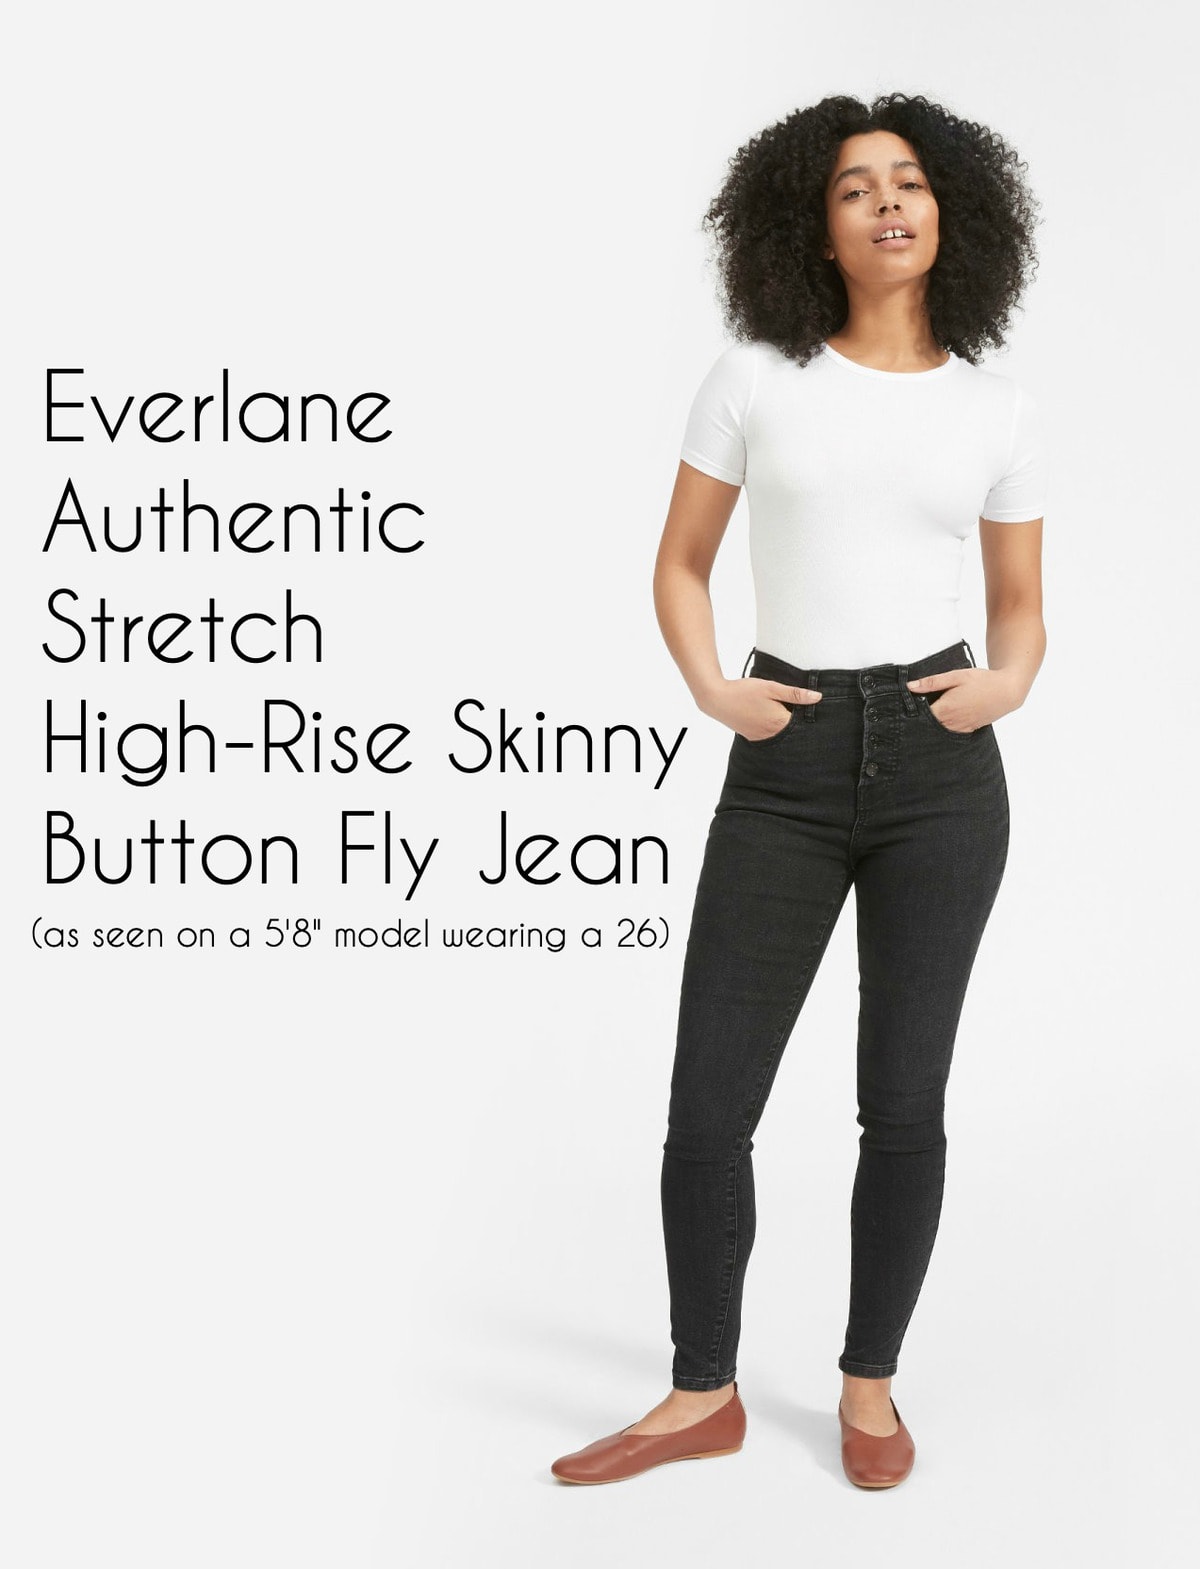 Everlane Authentic Stretch High-Rise Skinny Button Fly Jean Review